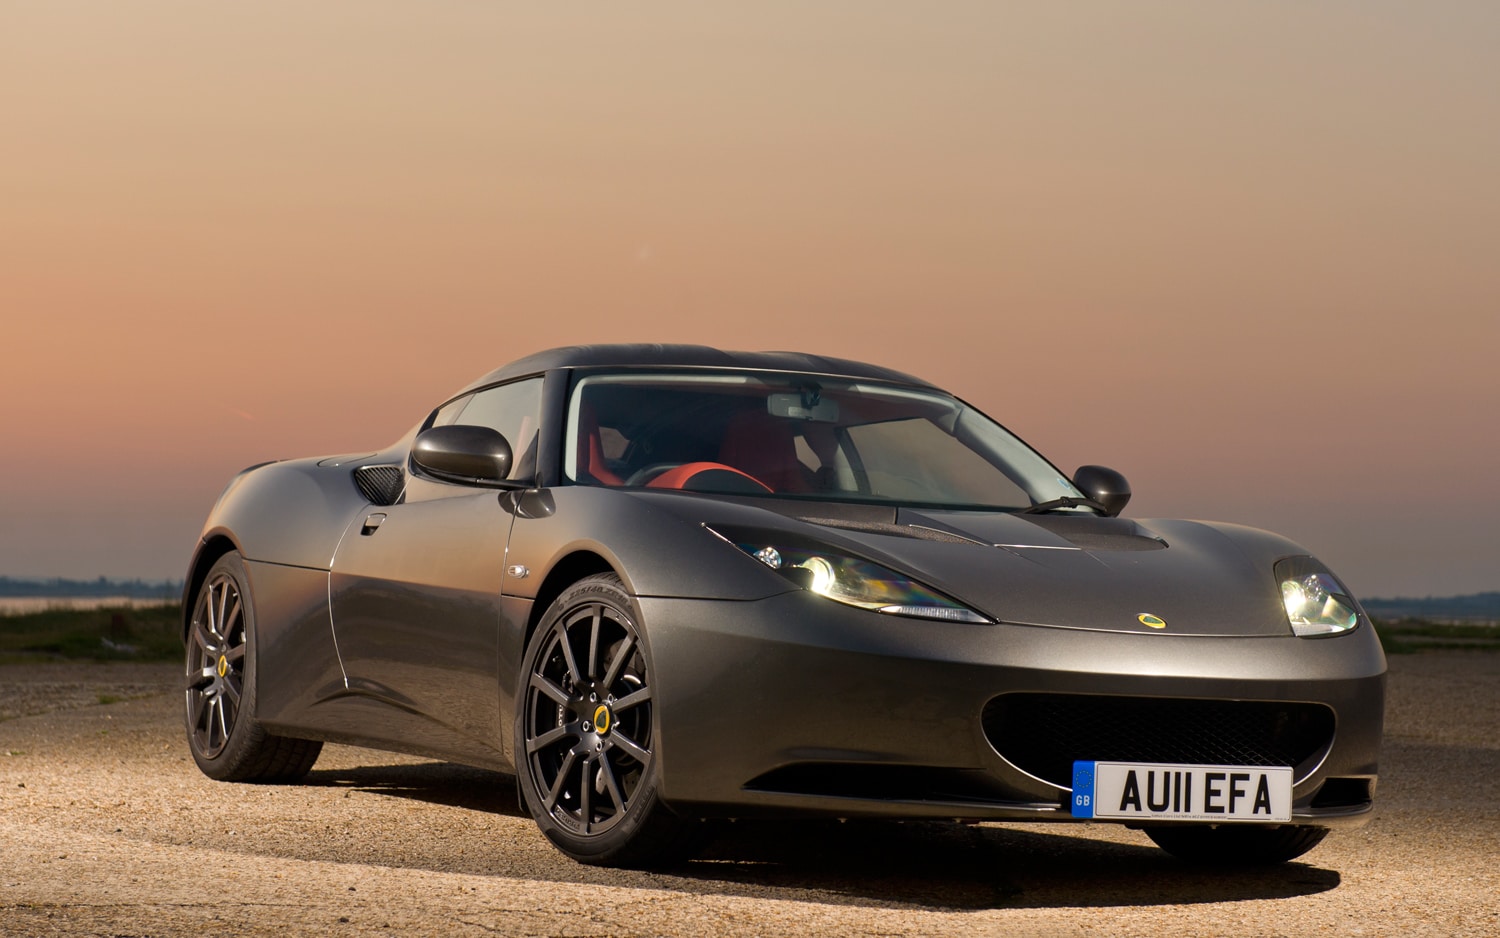 First Drive: 2012 Lotus Evora IPS Automatic